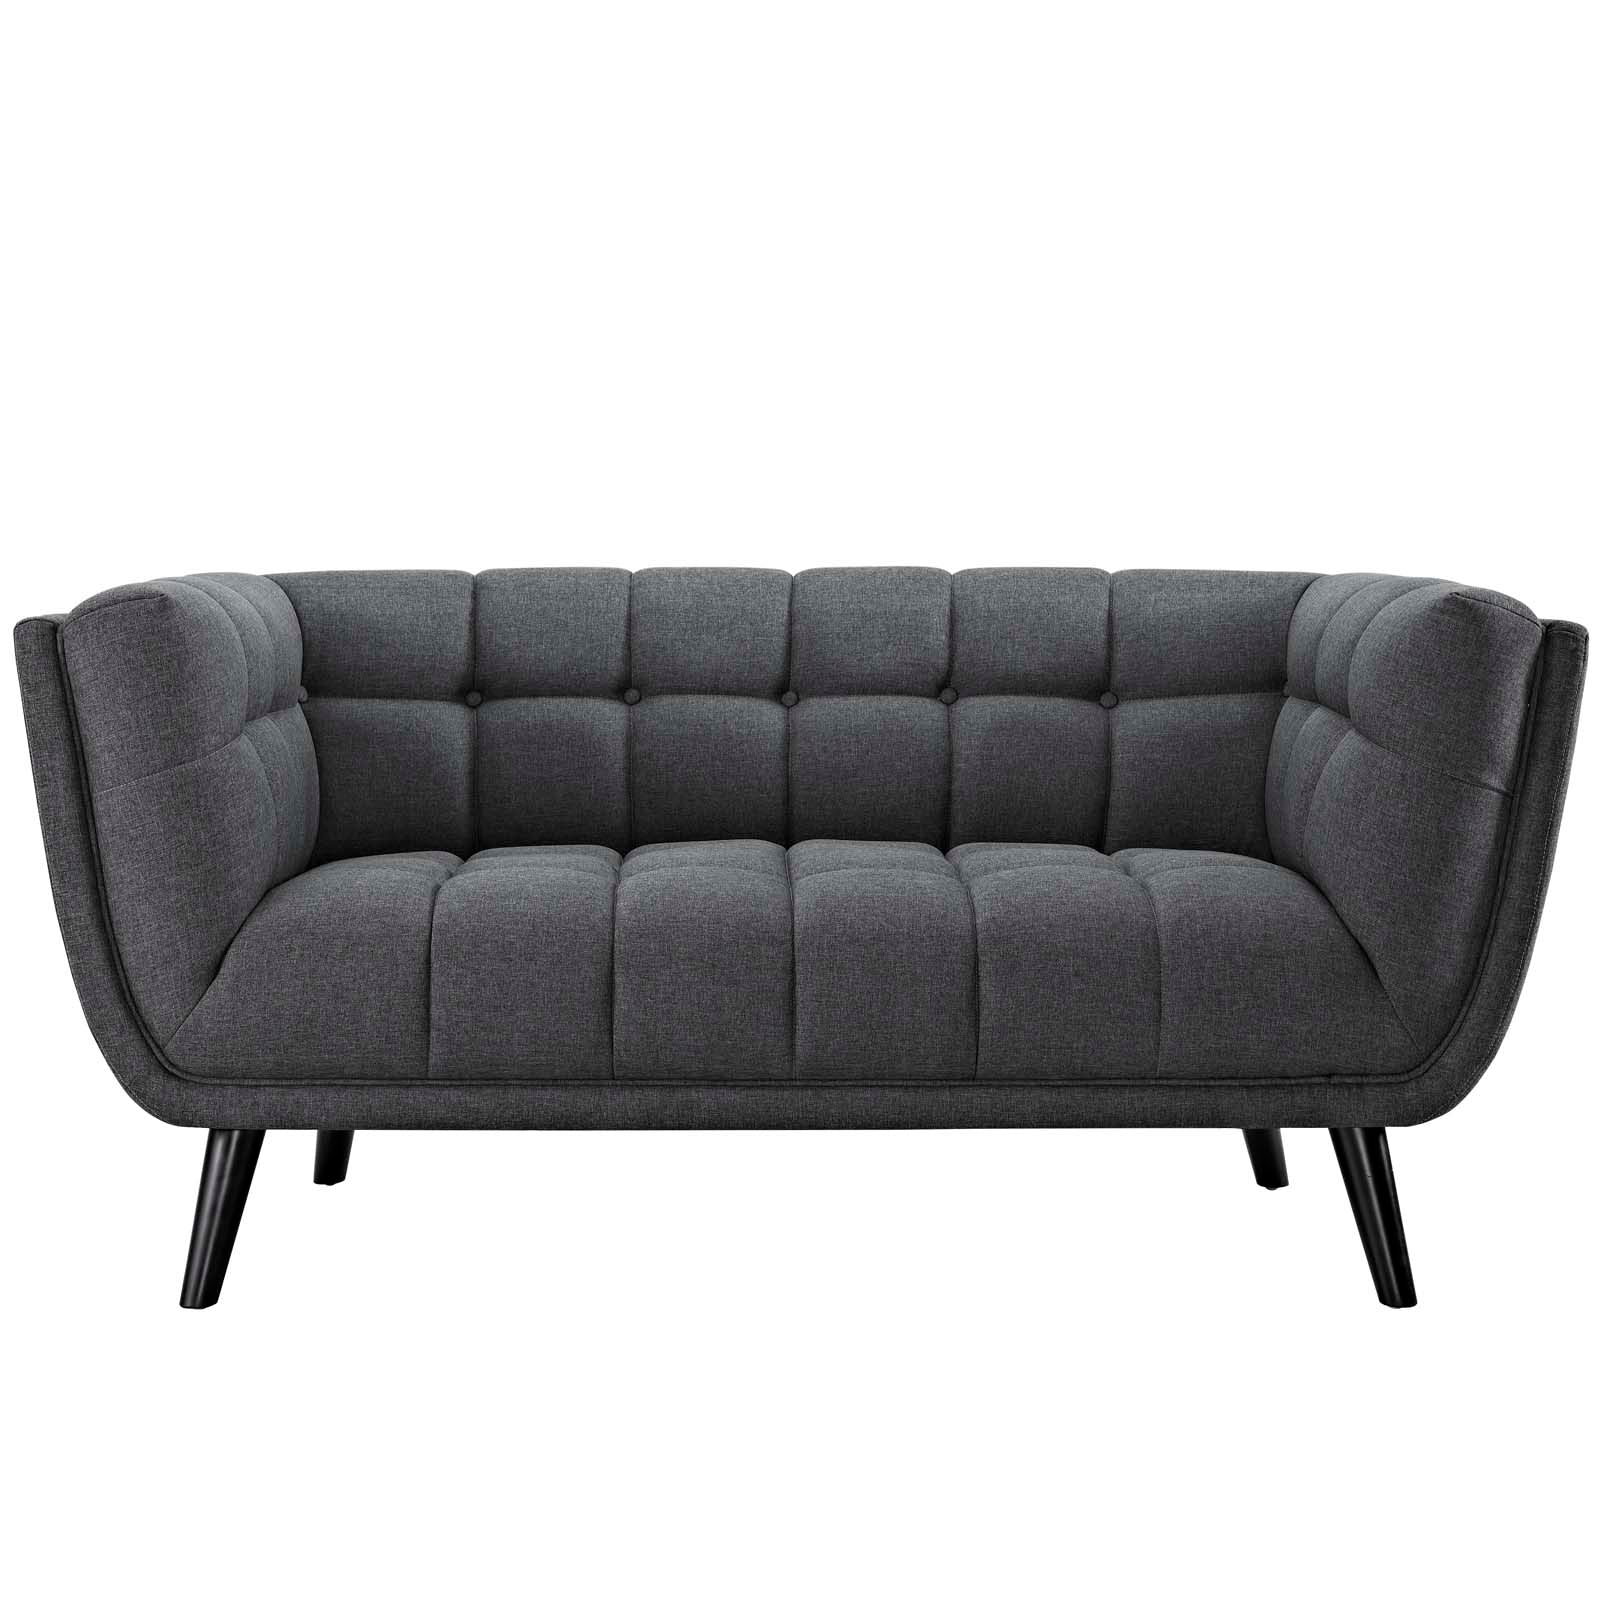 Bestow 2 Piece Upholstered Fabric Sofa and Loveseat Set - East Shore Modern Home Furnishings